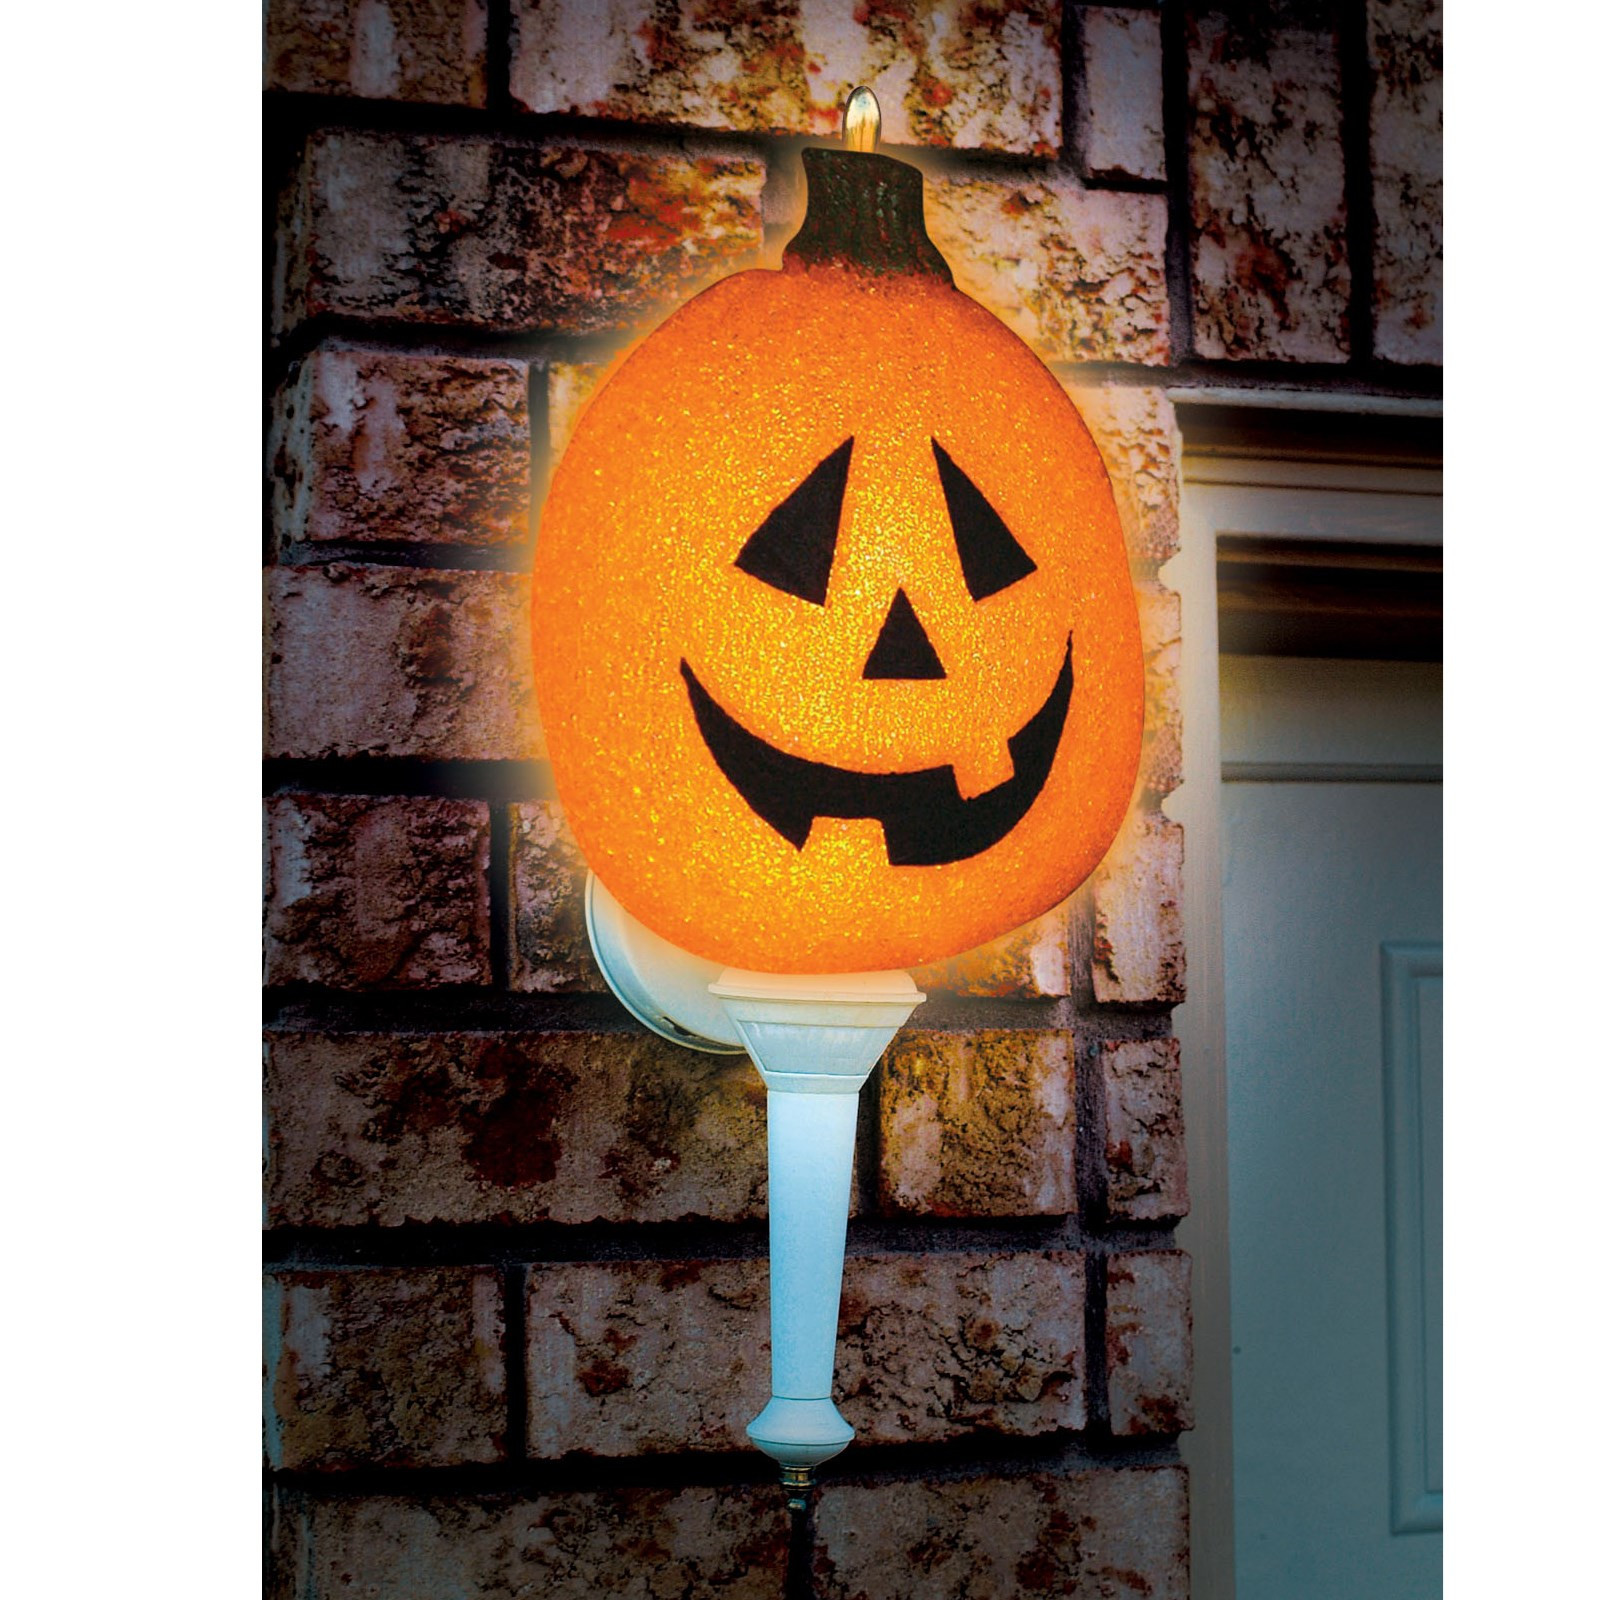 Halloween Lamp Shade Covers
 Buy Sparkling Pumpkin Porch Light Cover